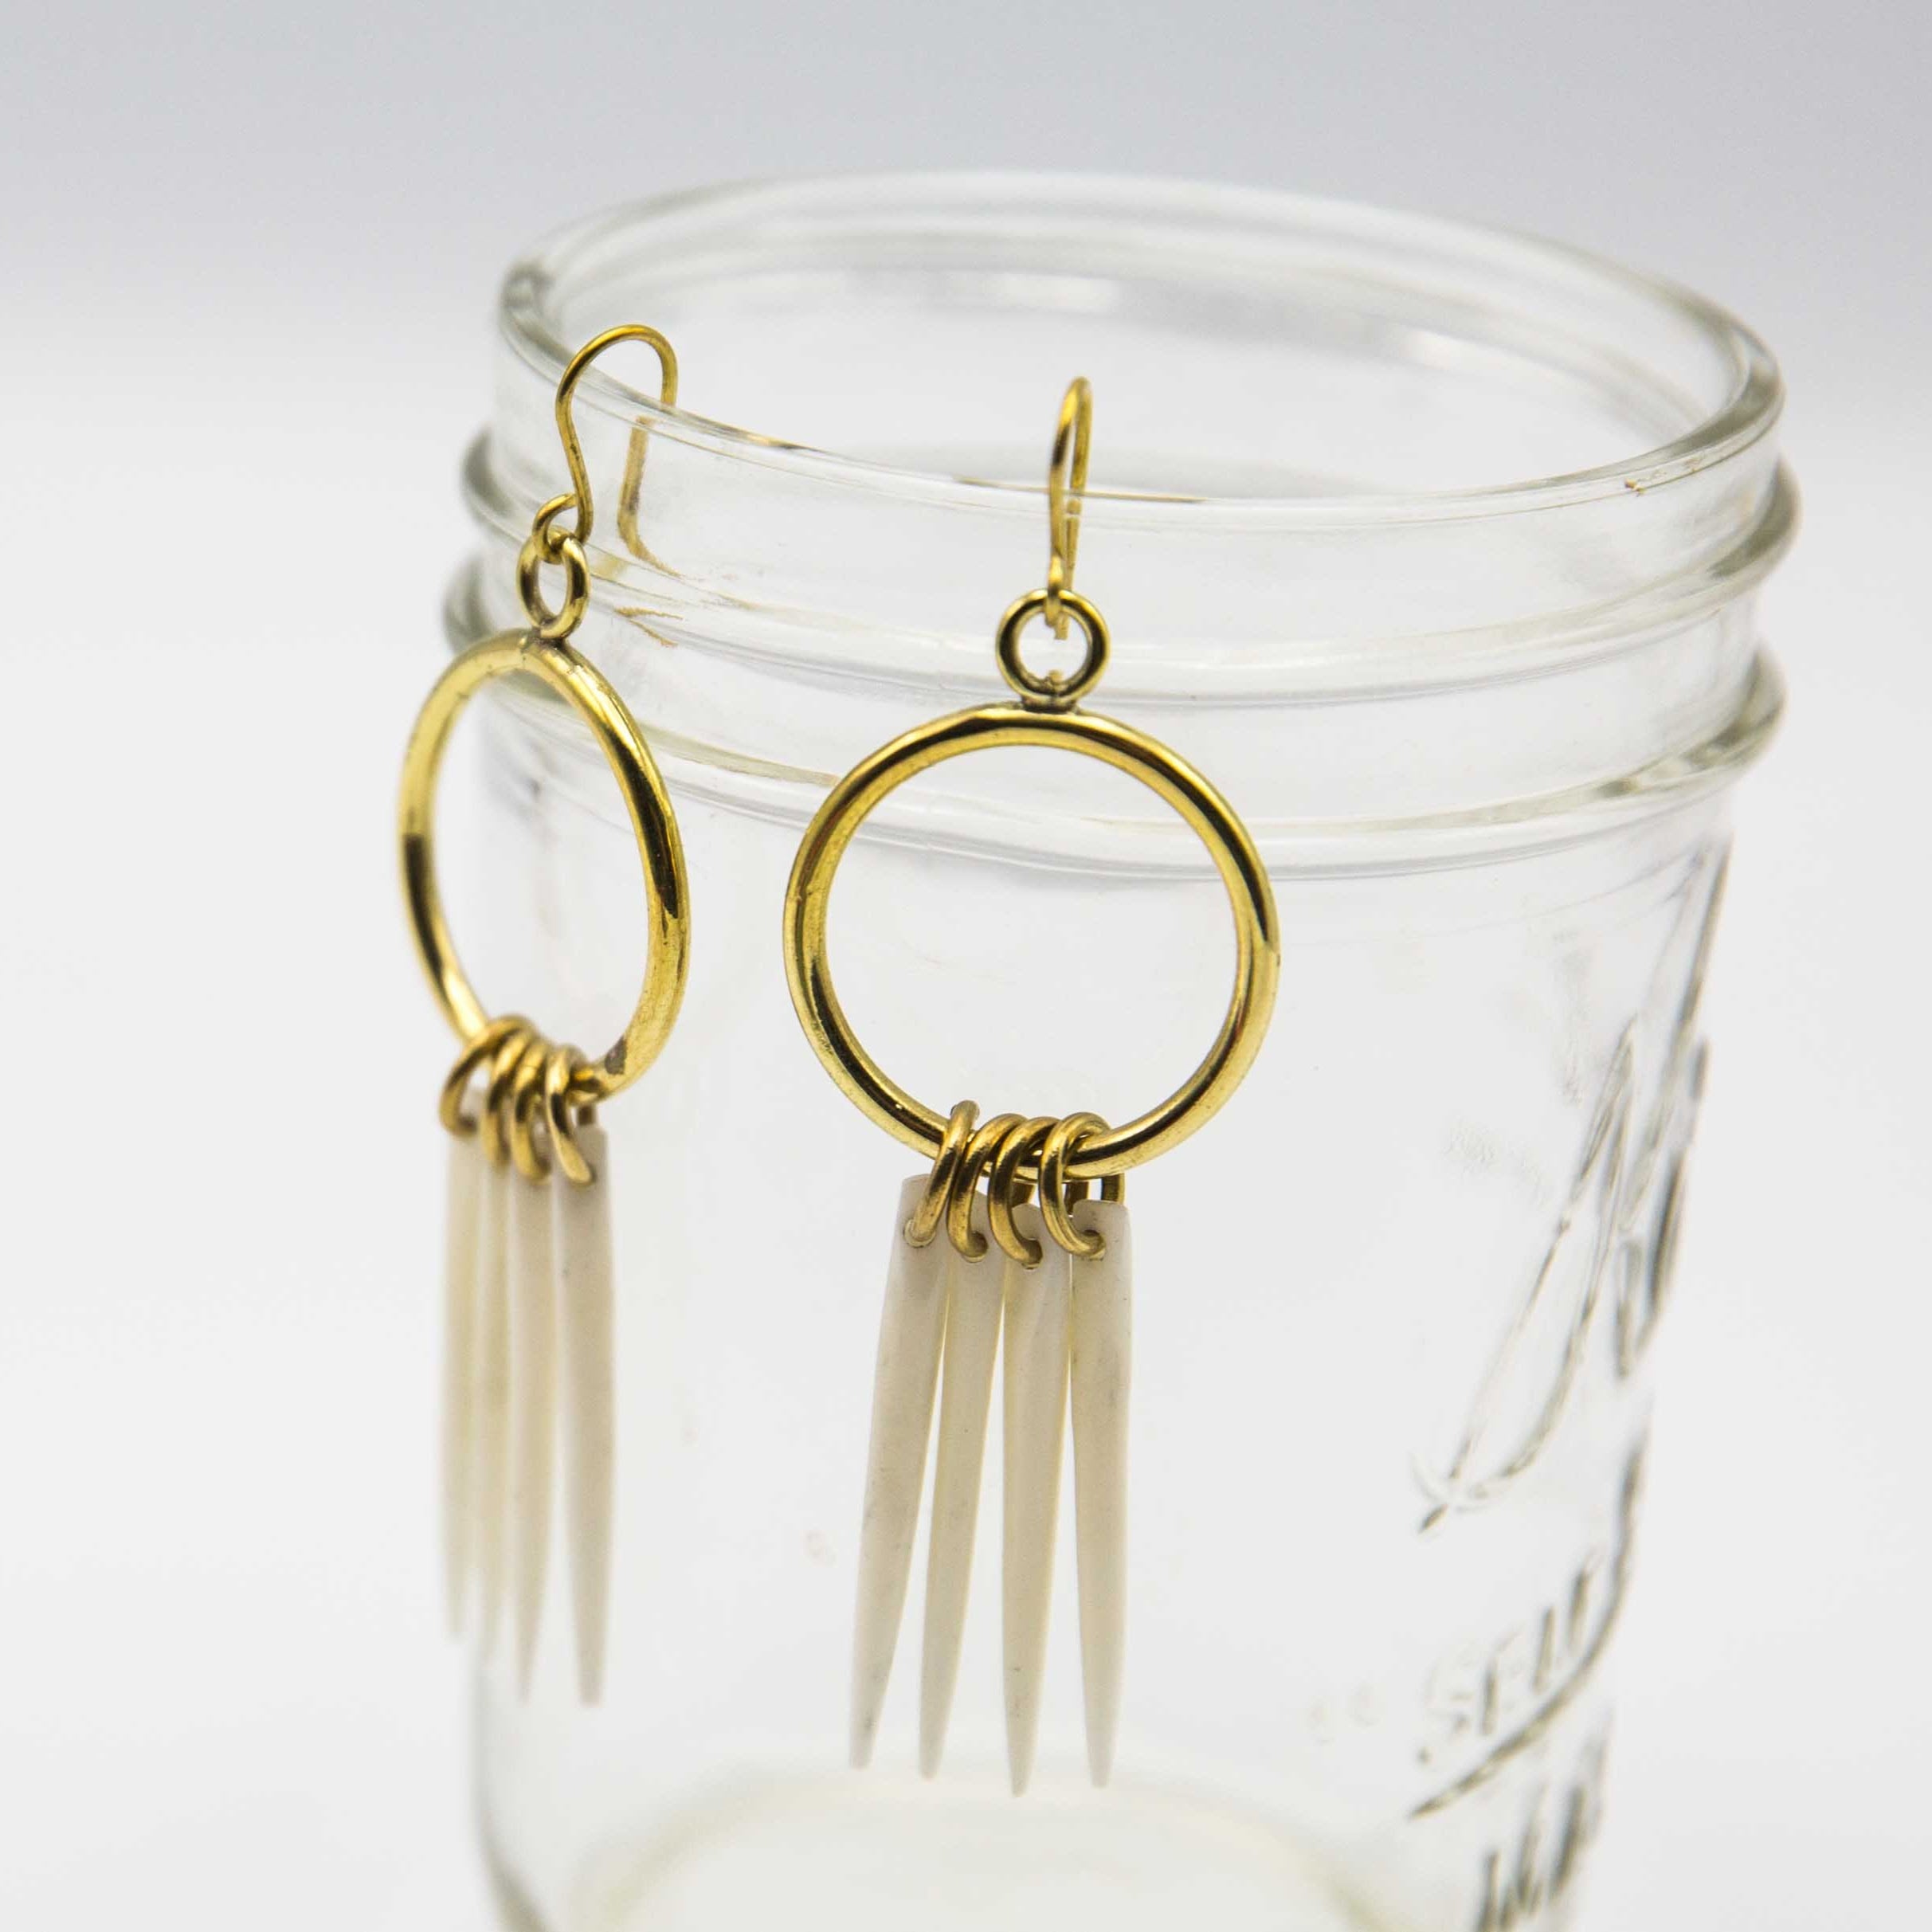 Bone Spear Earrings - Kenyan materials and design for a fair trade boutique